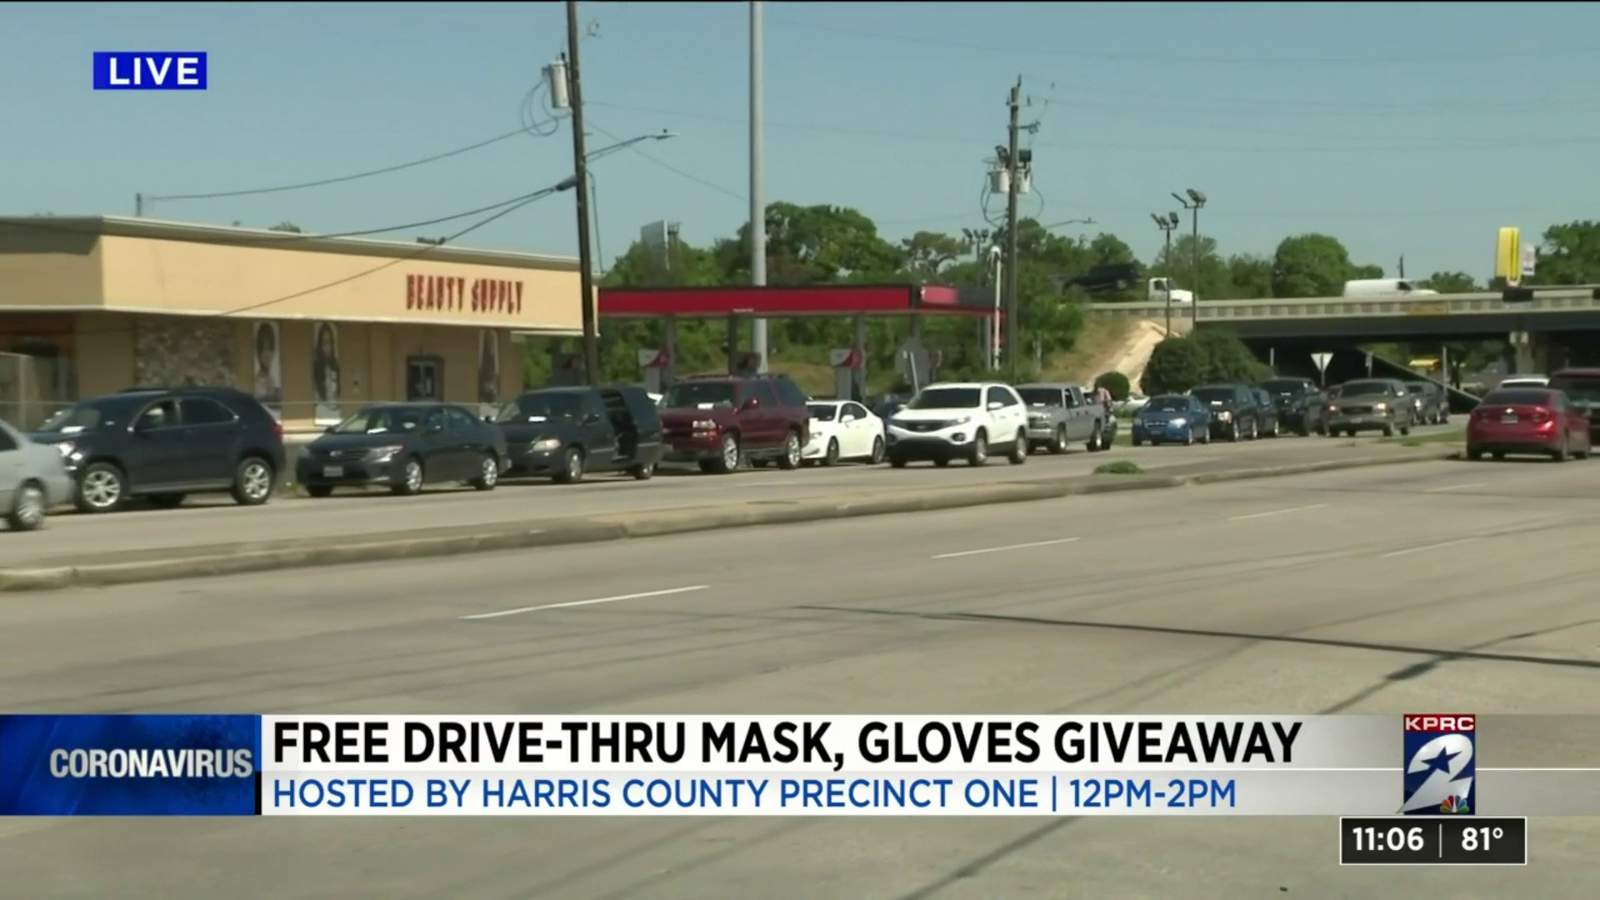 Harris County Precinct 1 partners with faith-based leaders to give out free masks, gloves